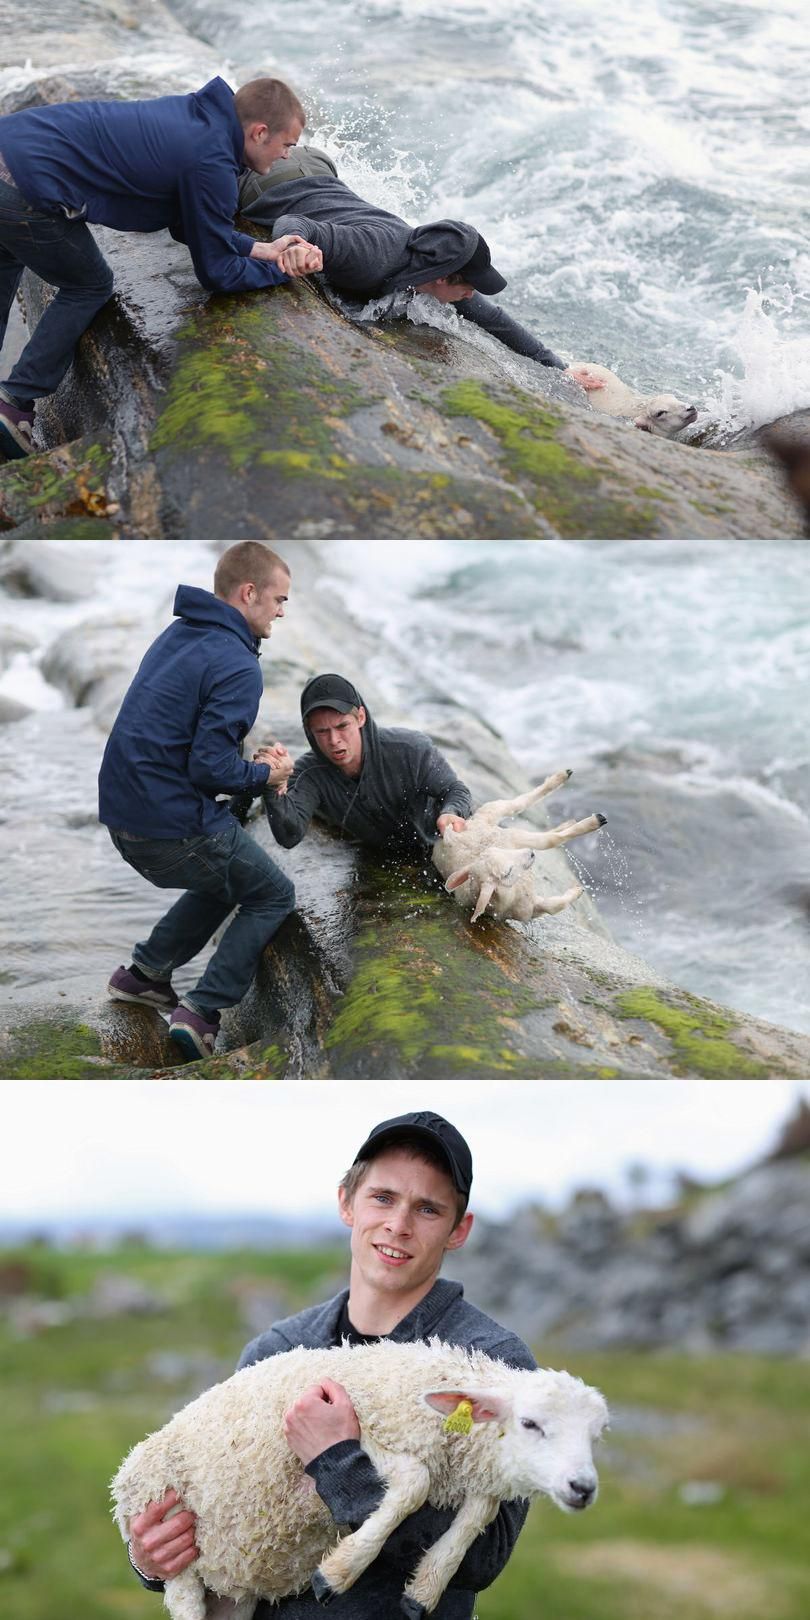 Just a couple guys rescuing a lamb.